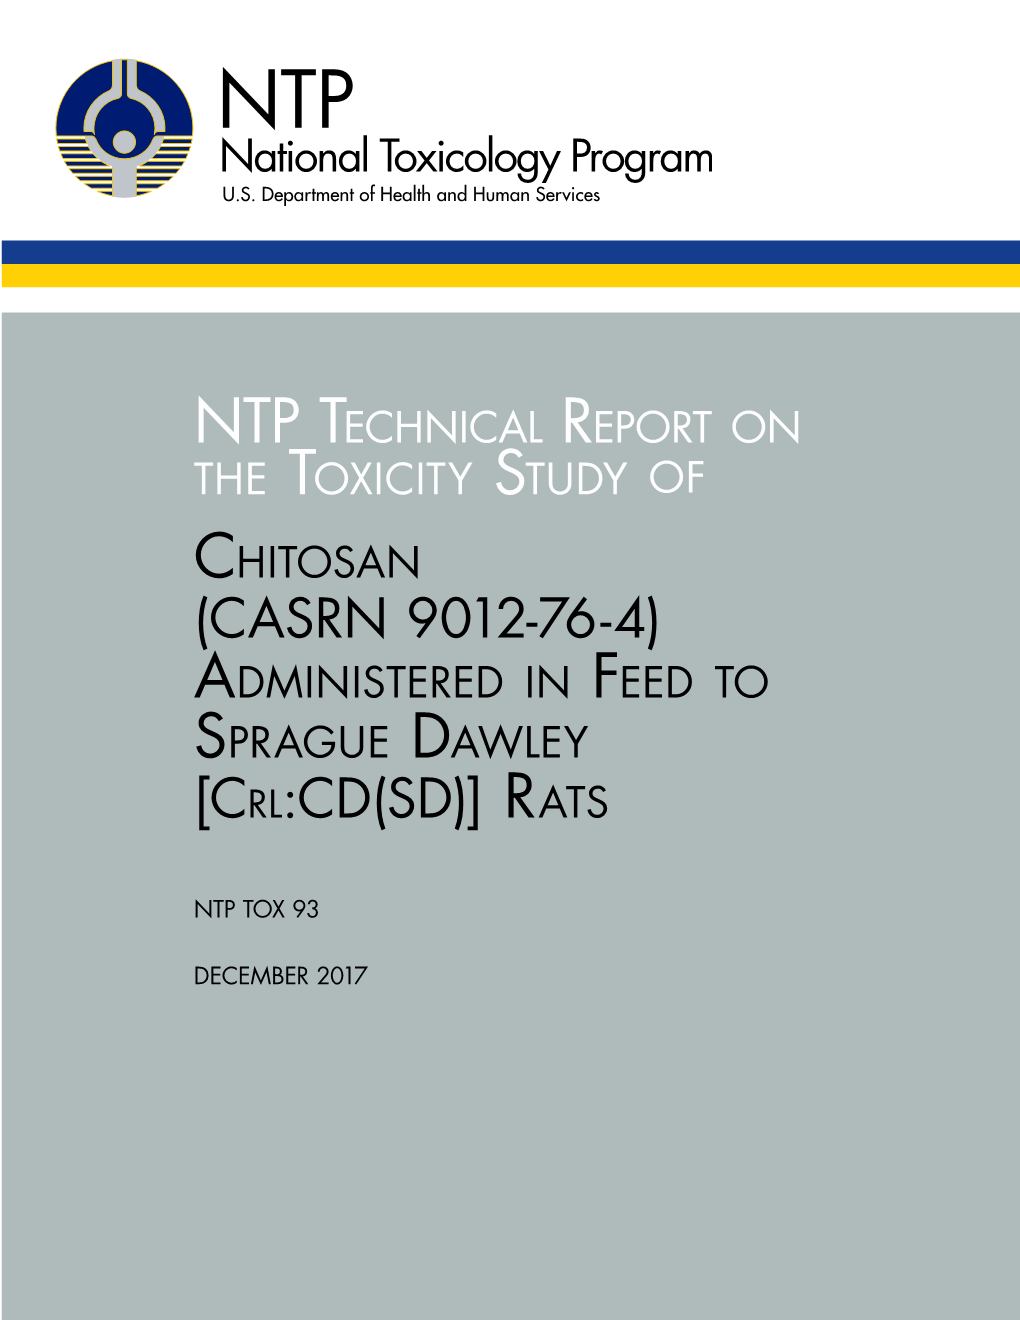 TOX-93: Toxicity Study of Chitosan (CASRN 9012-76-4)